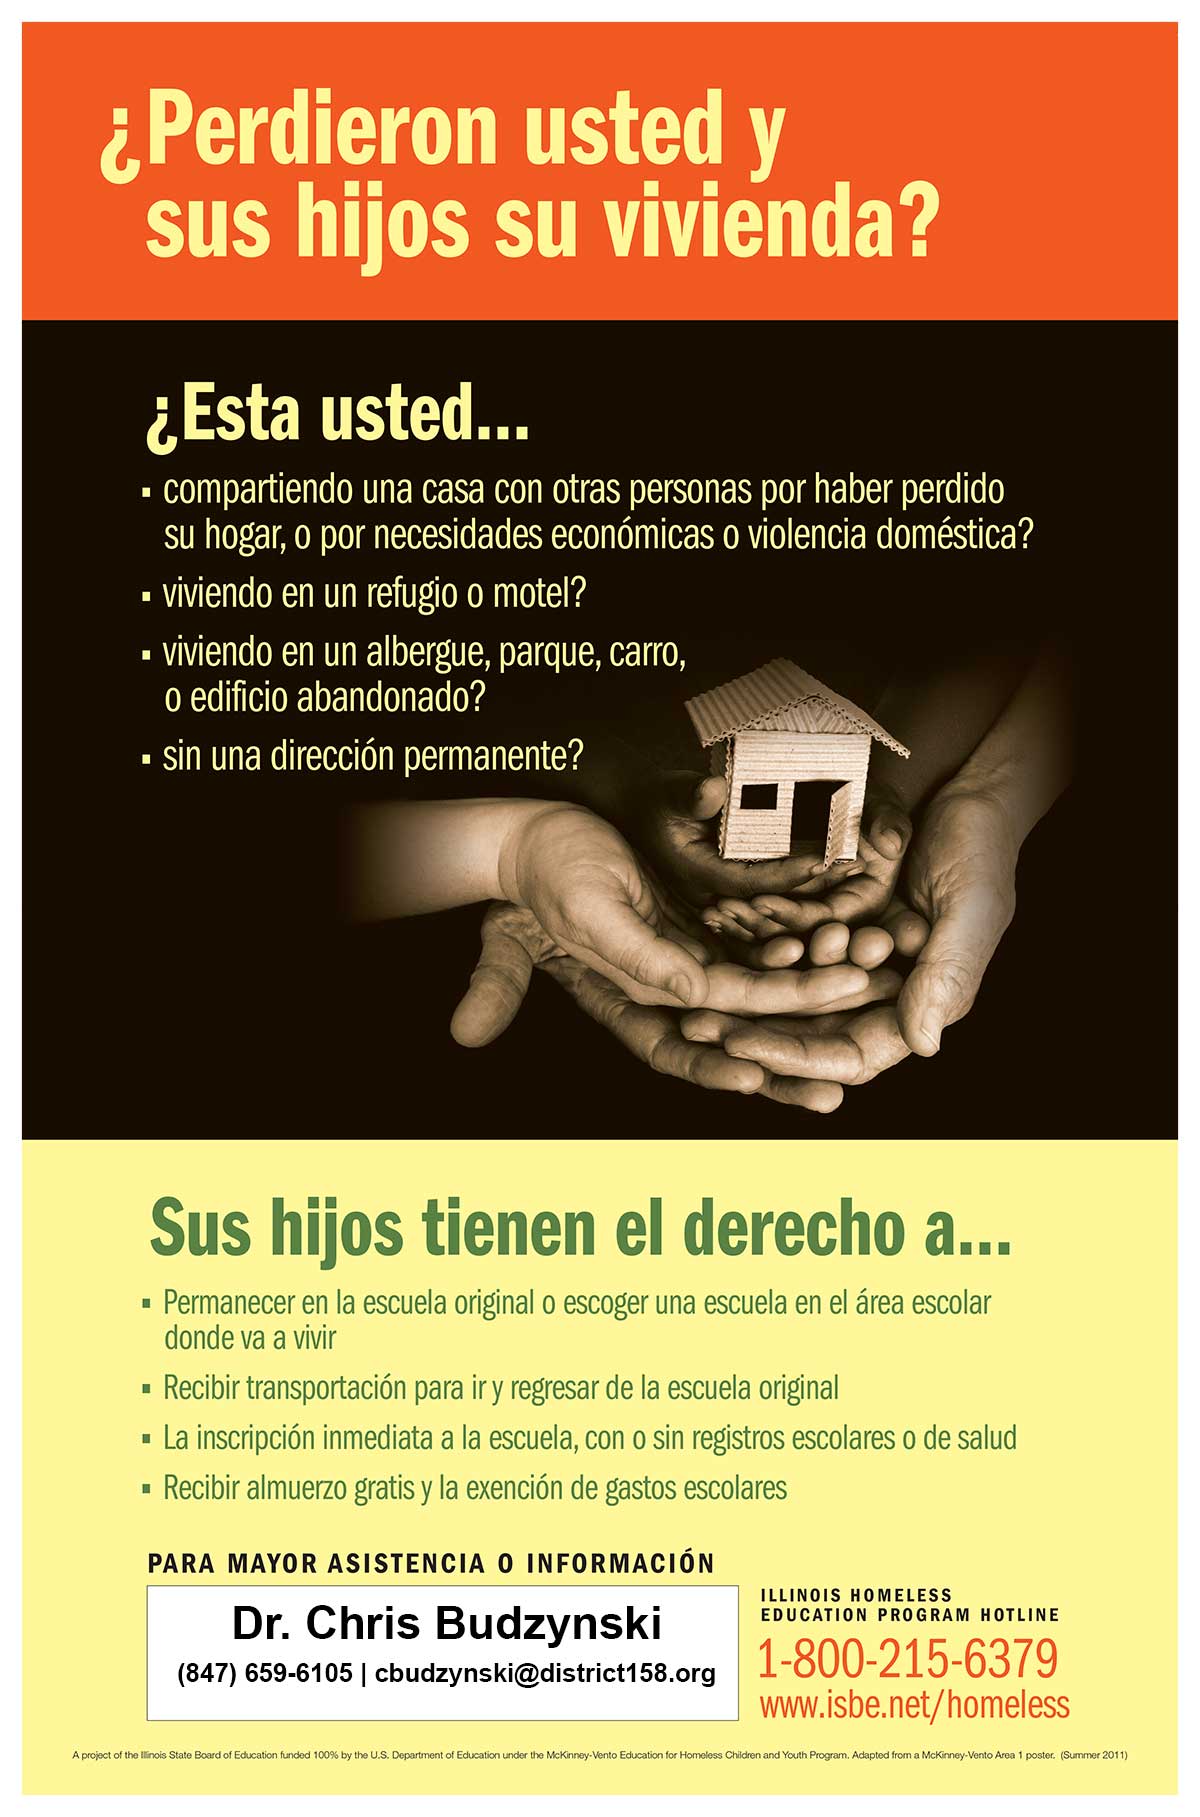 Homeless Rights Poster in Spanish